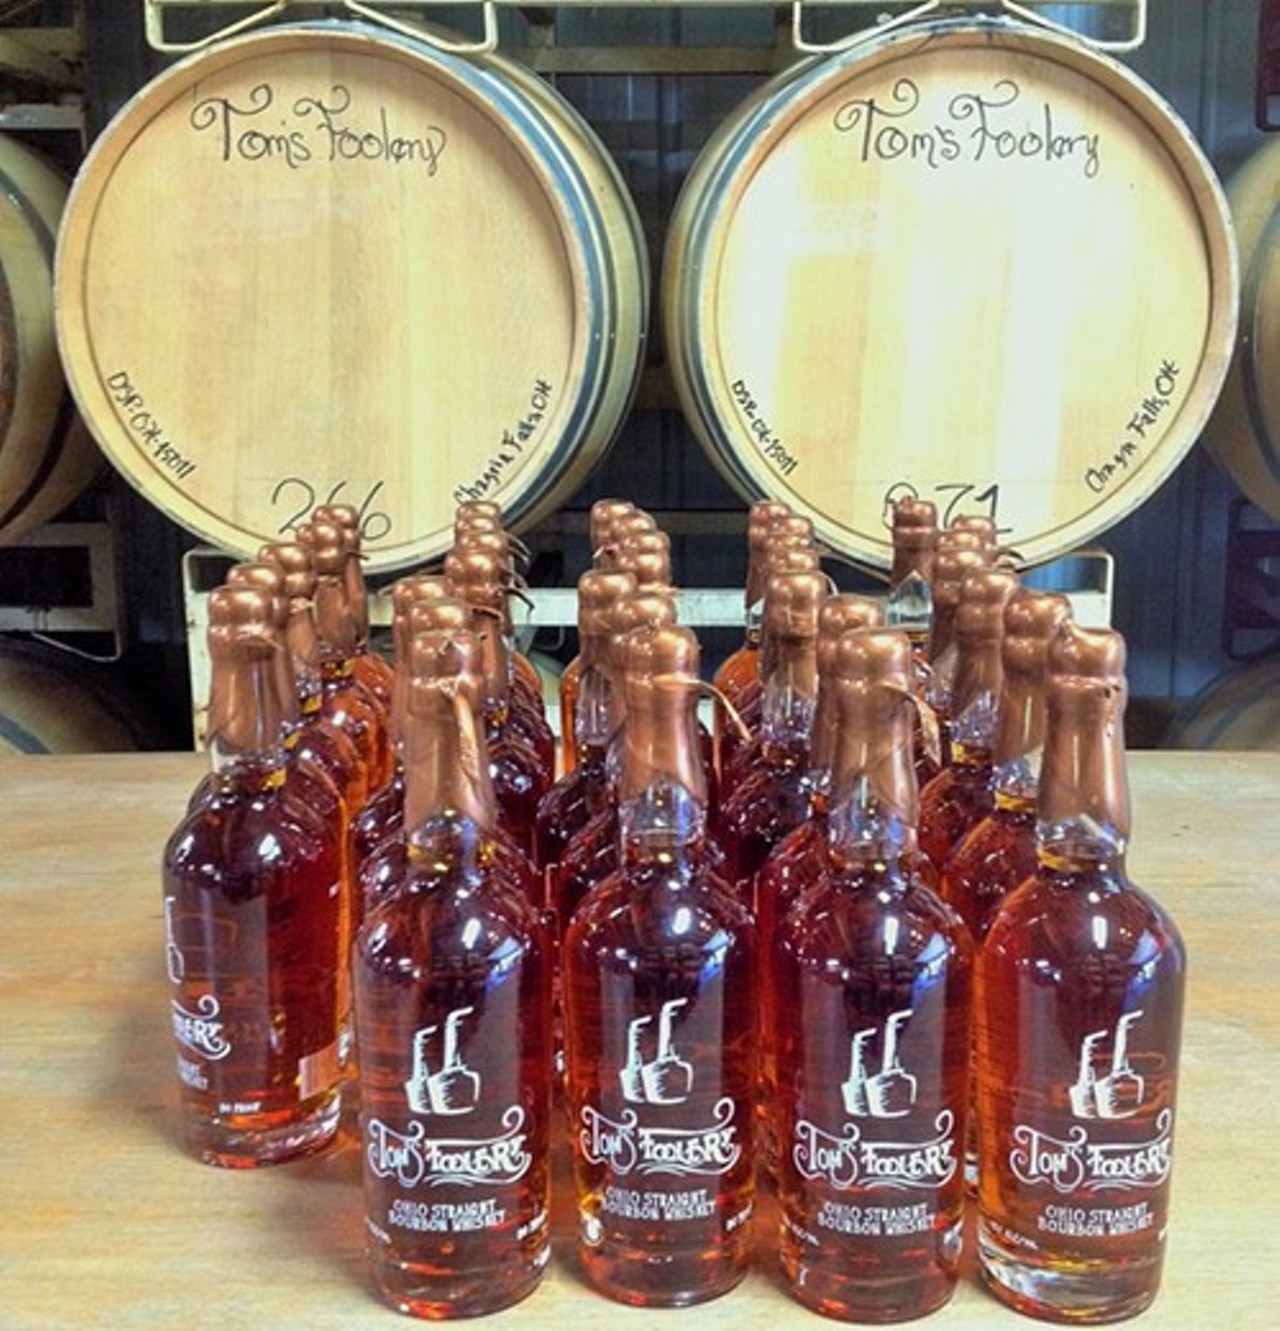 Only recently released, Tom's Foolery's Ohio Straight Bourbon is a labor of love from Tom Herbruck, who you probably know from his applejack, which comes from the same small distillery on his property in Geauga County. The bourbon is three years in the making, at least, and Herbruck and his wife have been filling one barrel of whiskey each day. The waiting is over, and you won't spend a better $39.95 this year. Thank us later.